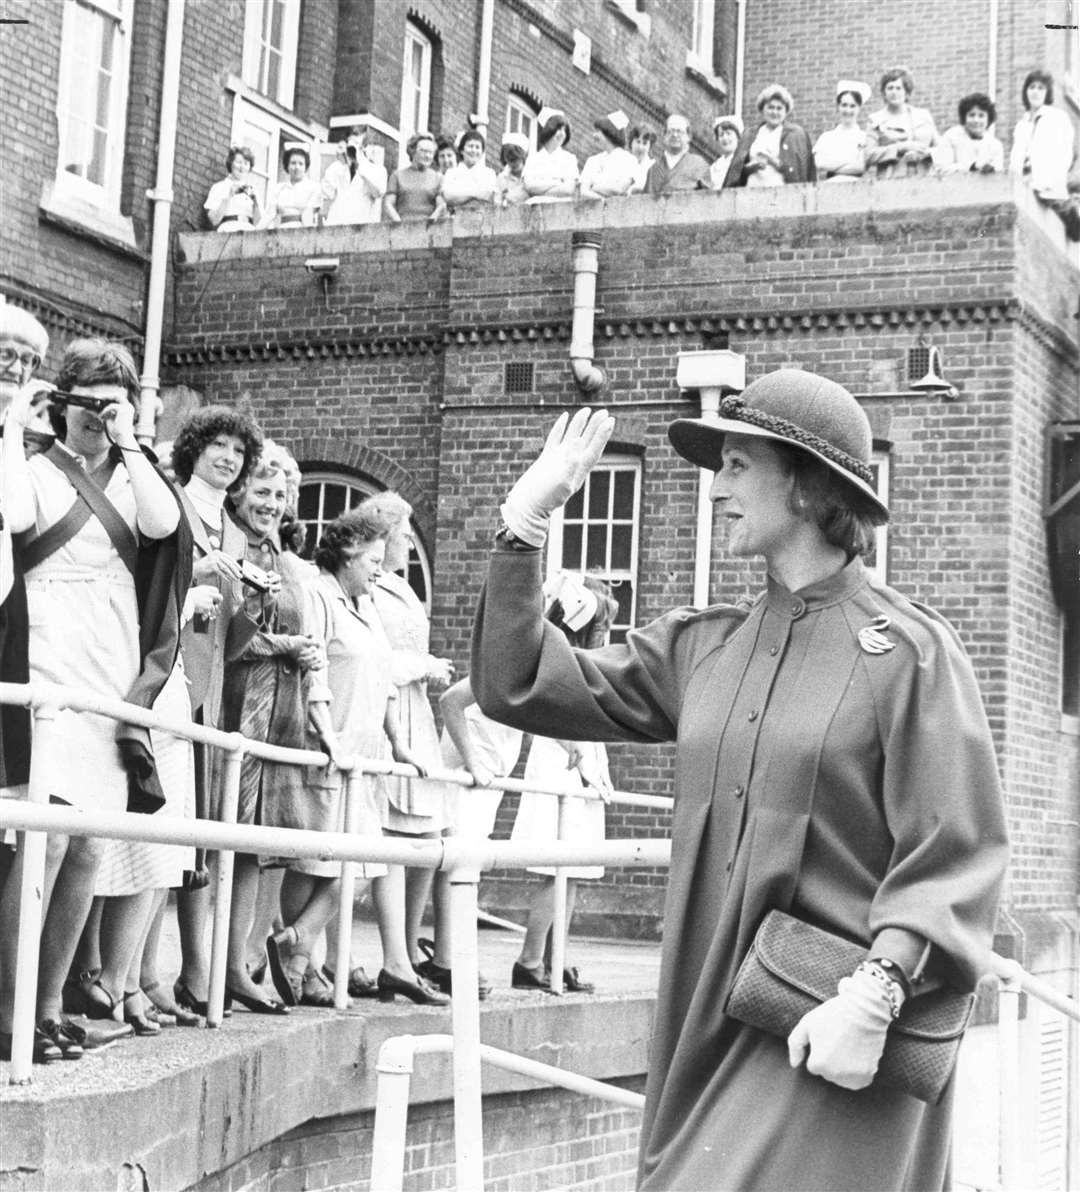 In May 1978, a smiling Princess Alexandra waved to staff as she visited St Bartholomew's Hospital in Rochester